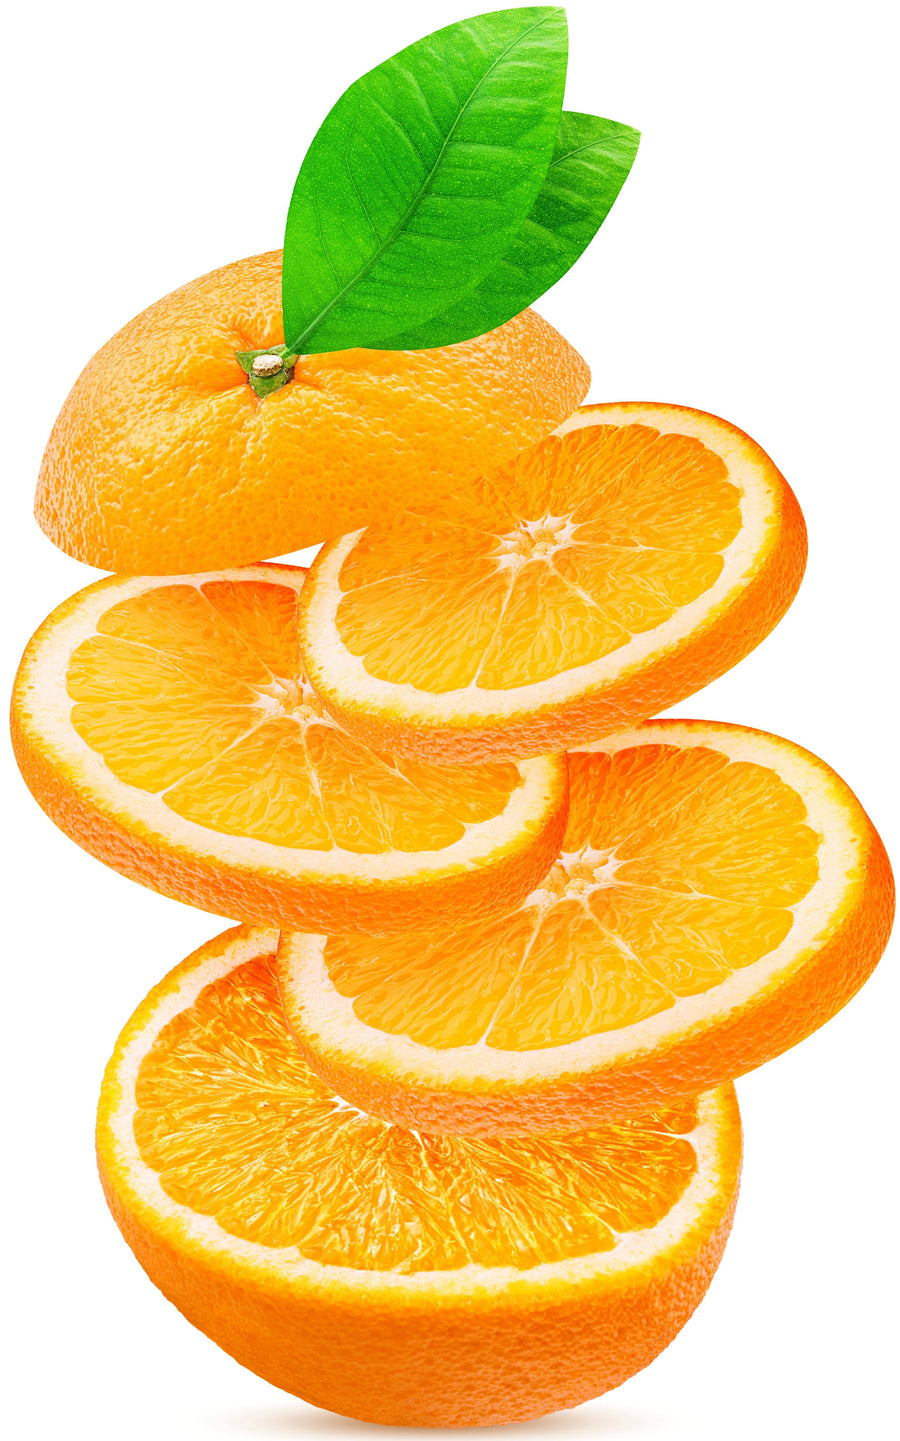 Image of three Orange slices in between the bottom and top of a sliced orange.